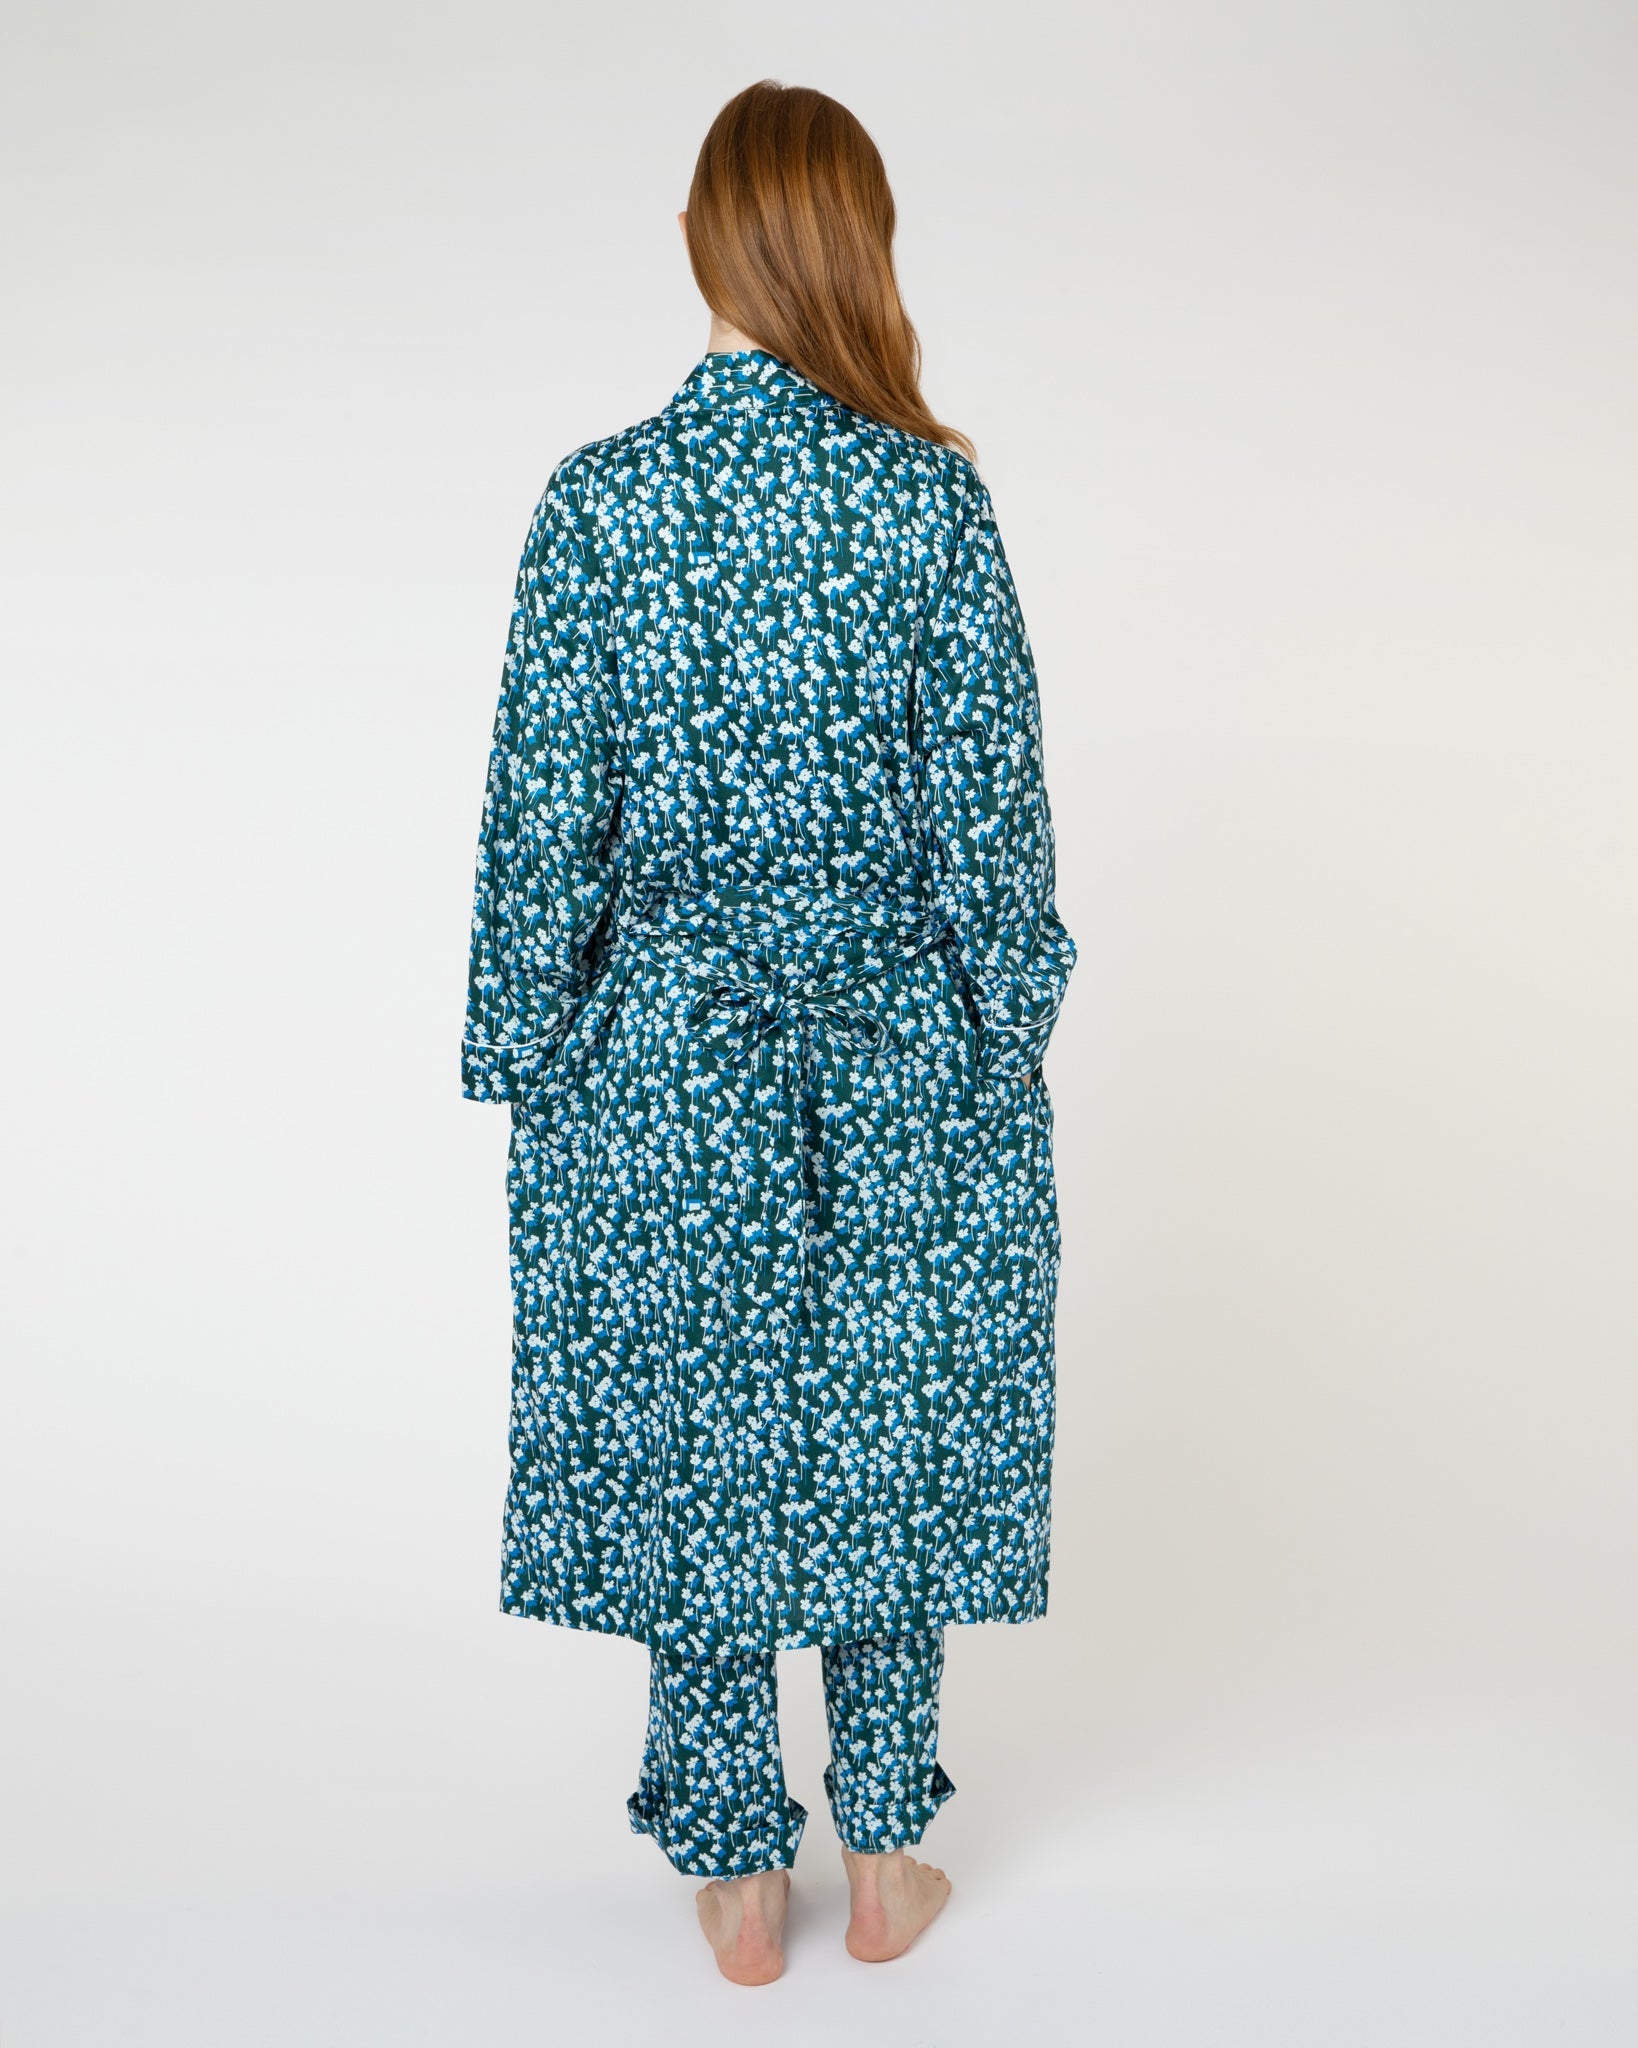 Green Spray of Flowers Organic Cotton Robe Dressing Gowns Yawn 